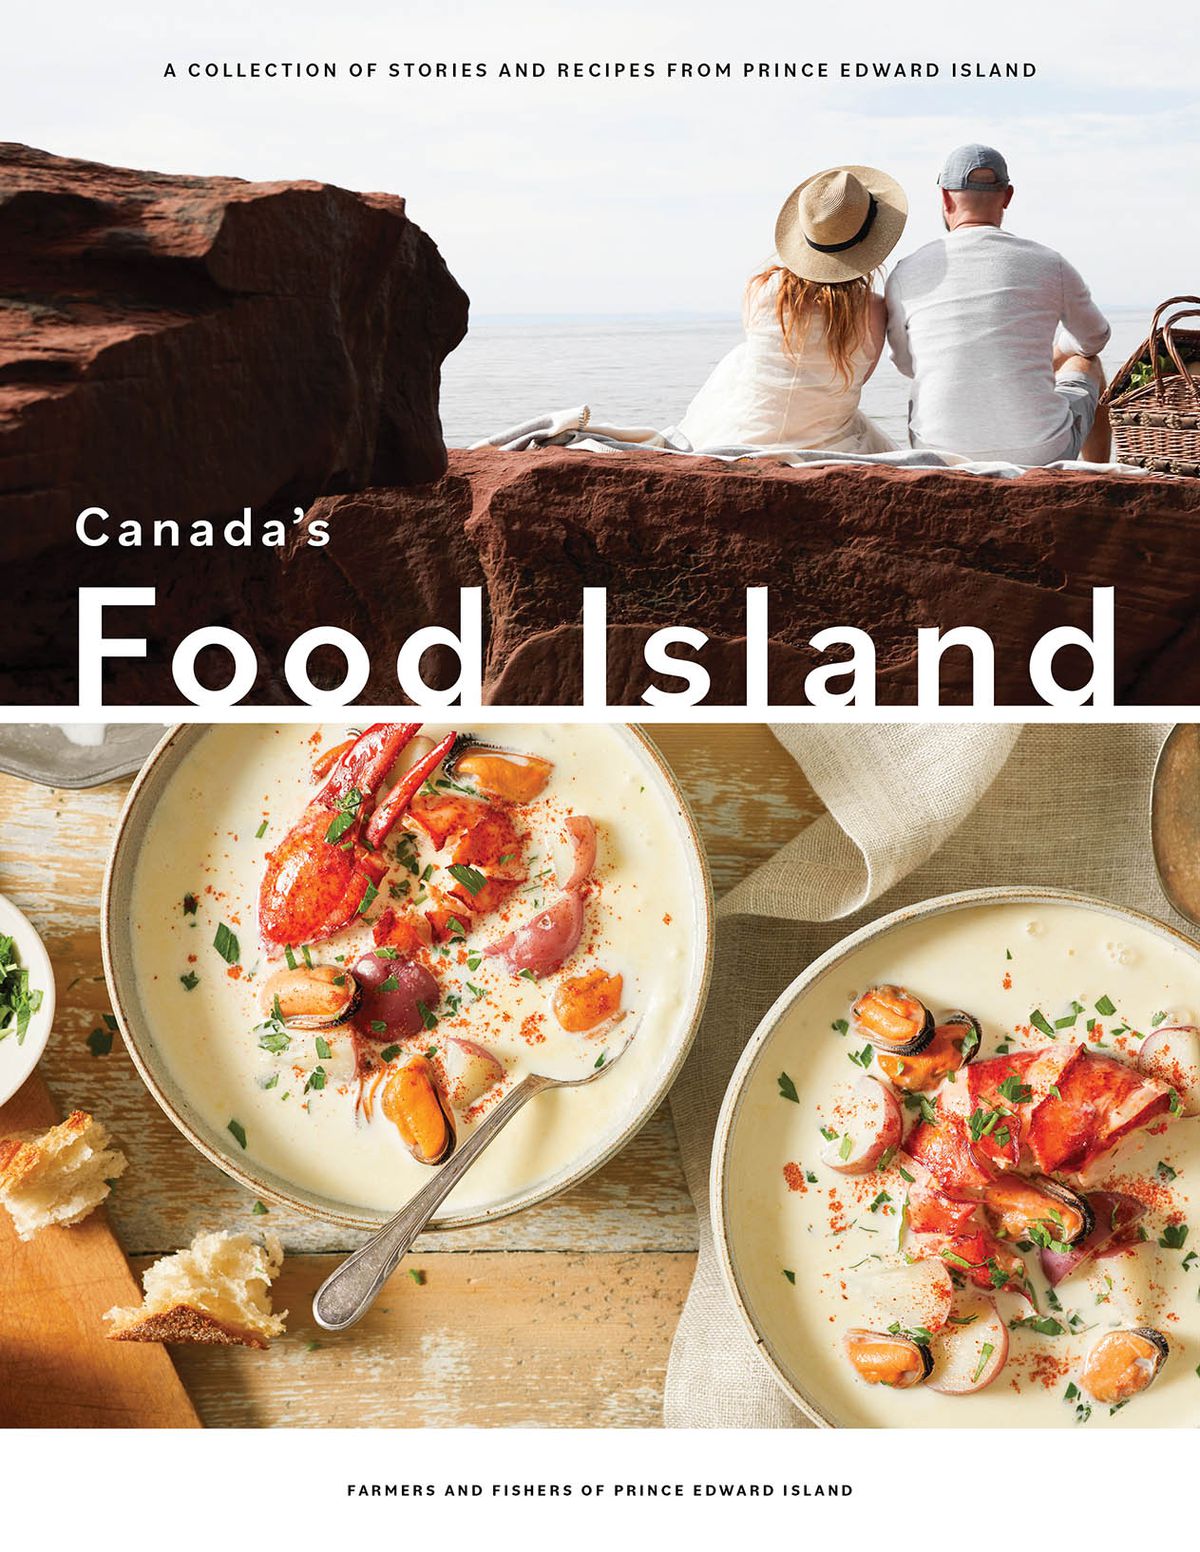 book cover with two people sitting on a rock looking at the sea and a second photo beneath of two bowls of lobster chowder.